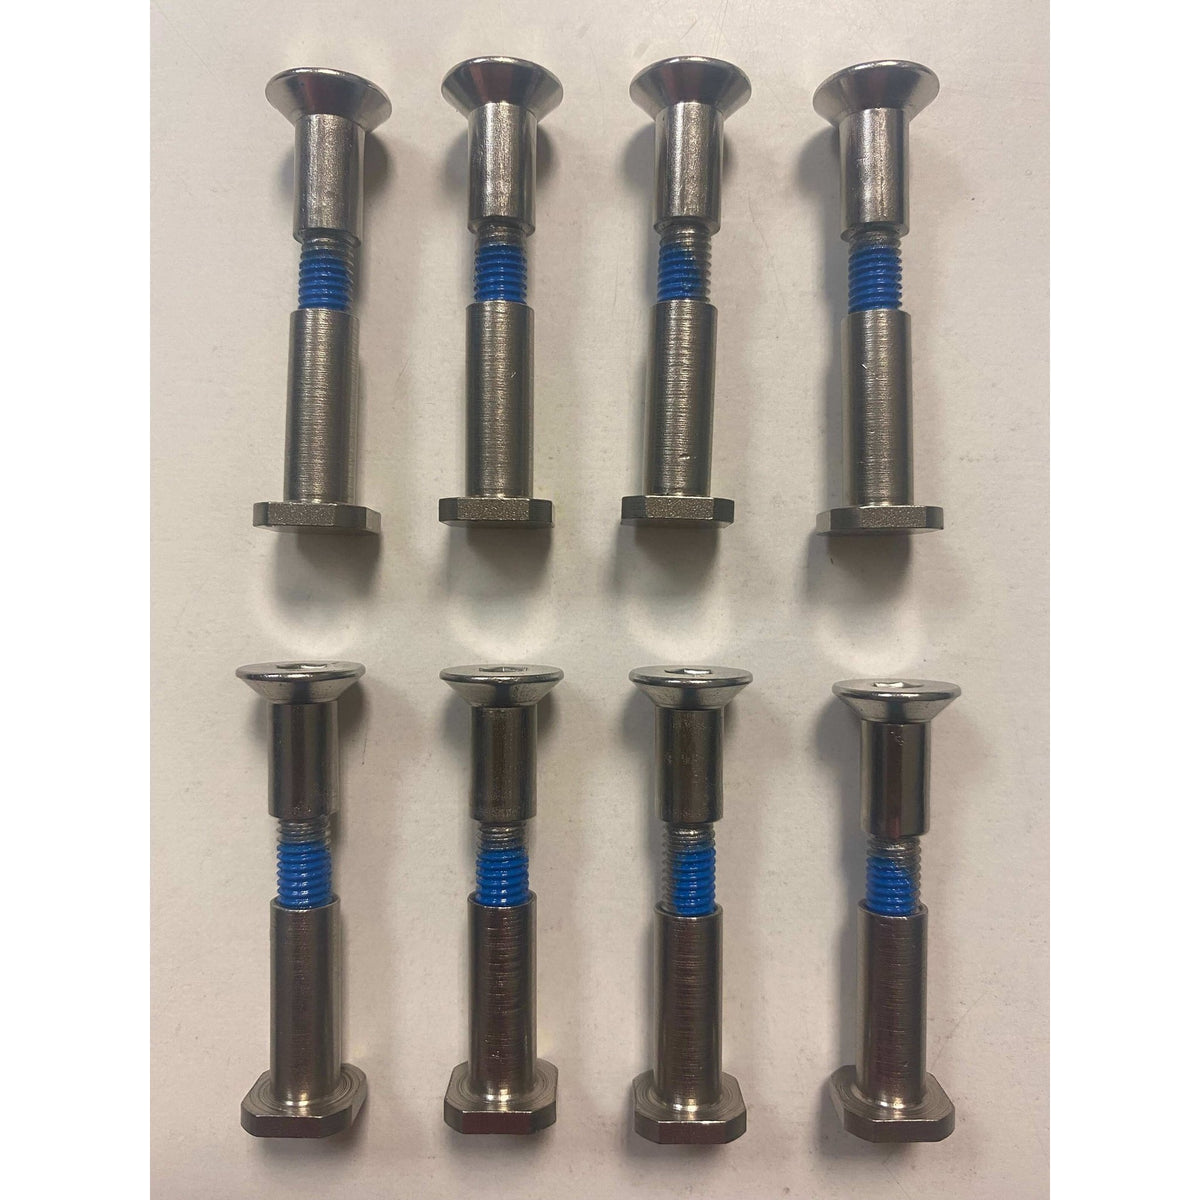 Helo 6mm Square Head Wheel Axle Bolts - 8 Pack